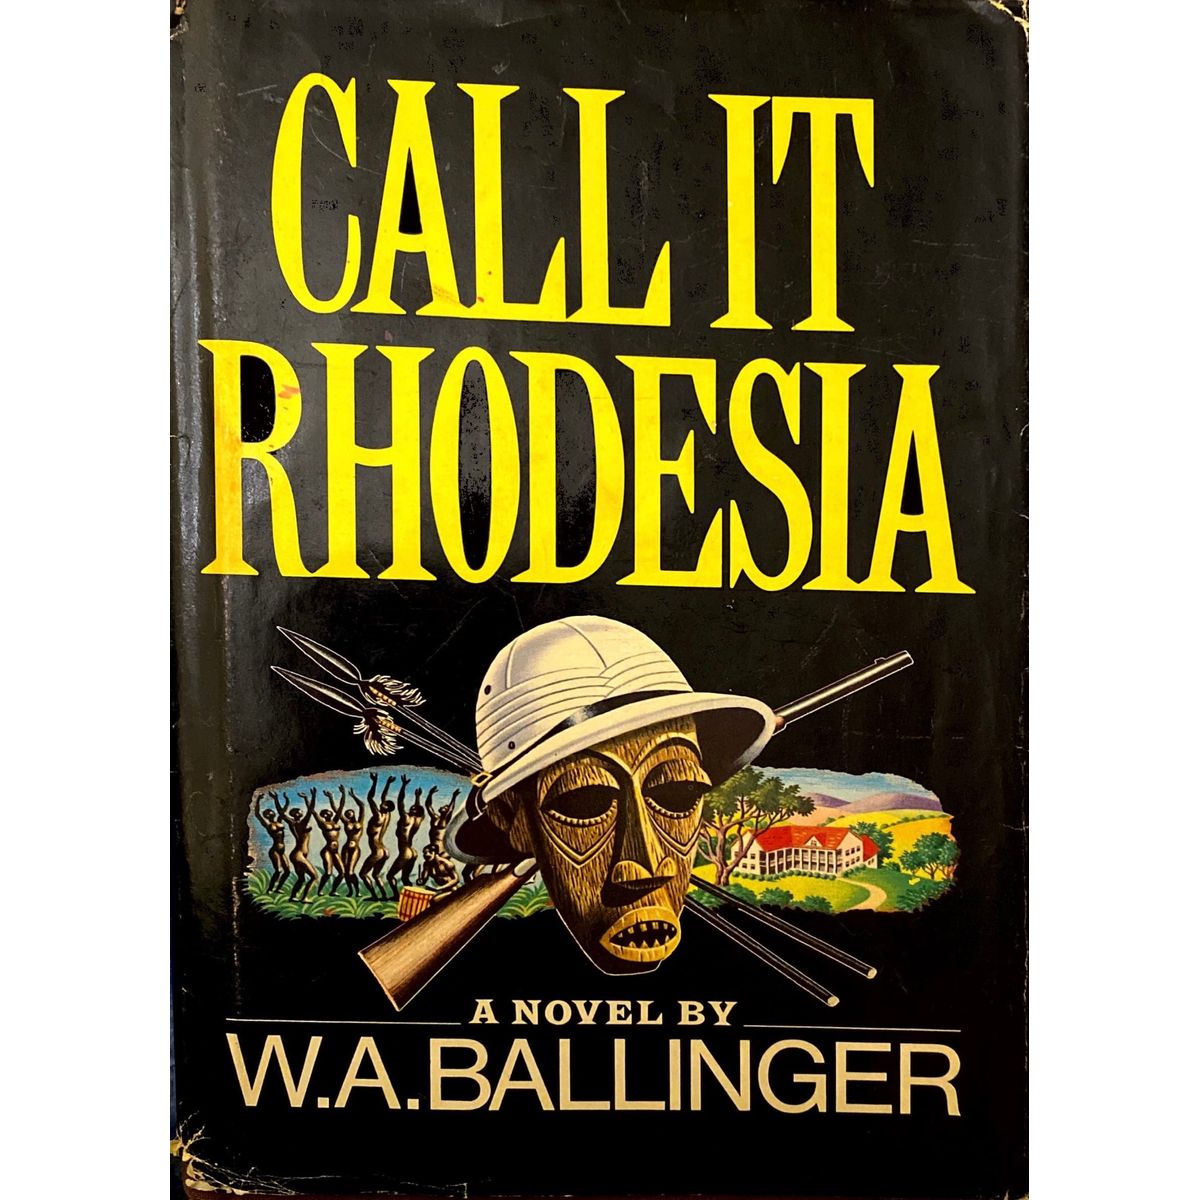 Call It Rhodesia by W.A. Ballinger, 1st American Edition [1968]